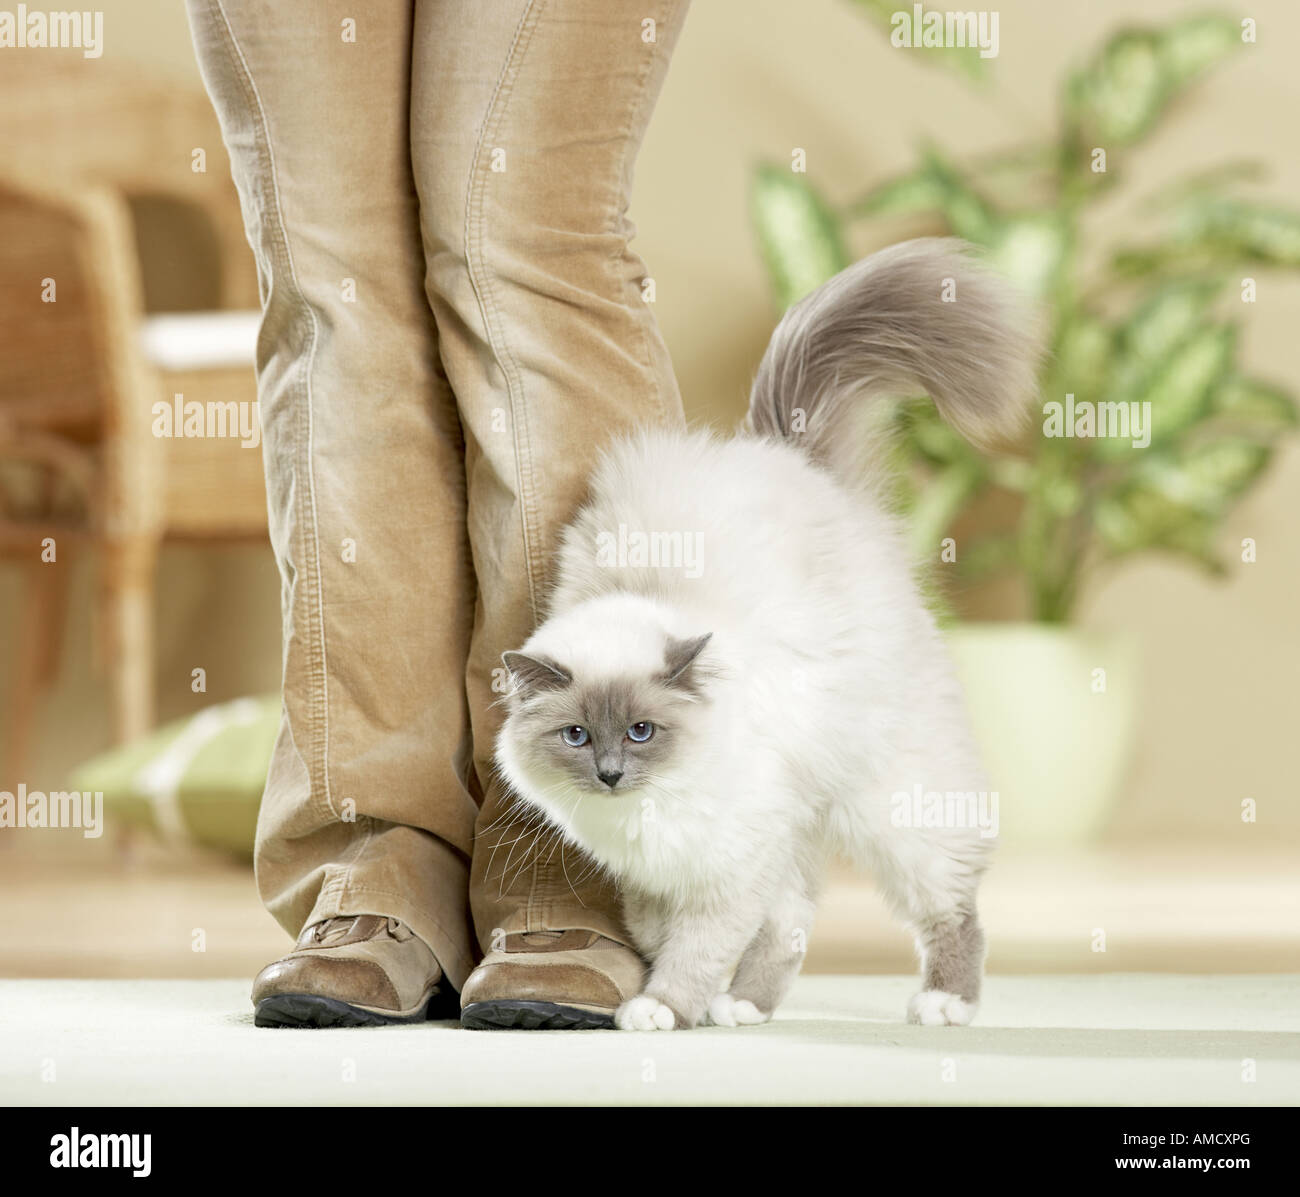 Sacred cat of Burma rubbing against legs of owner Stock Photo